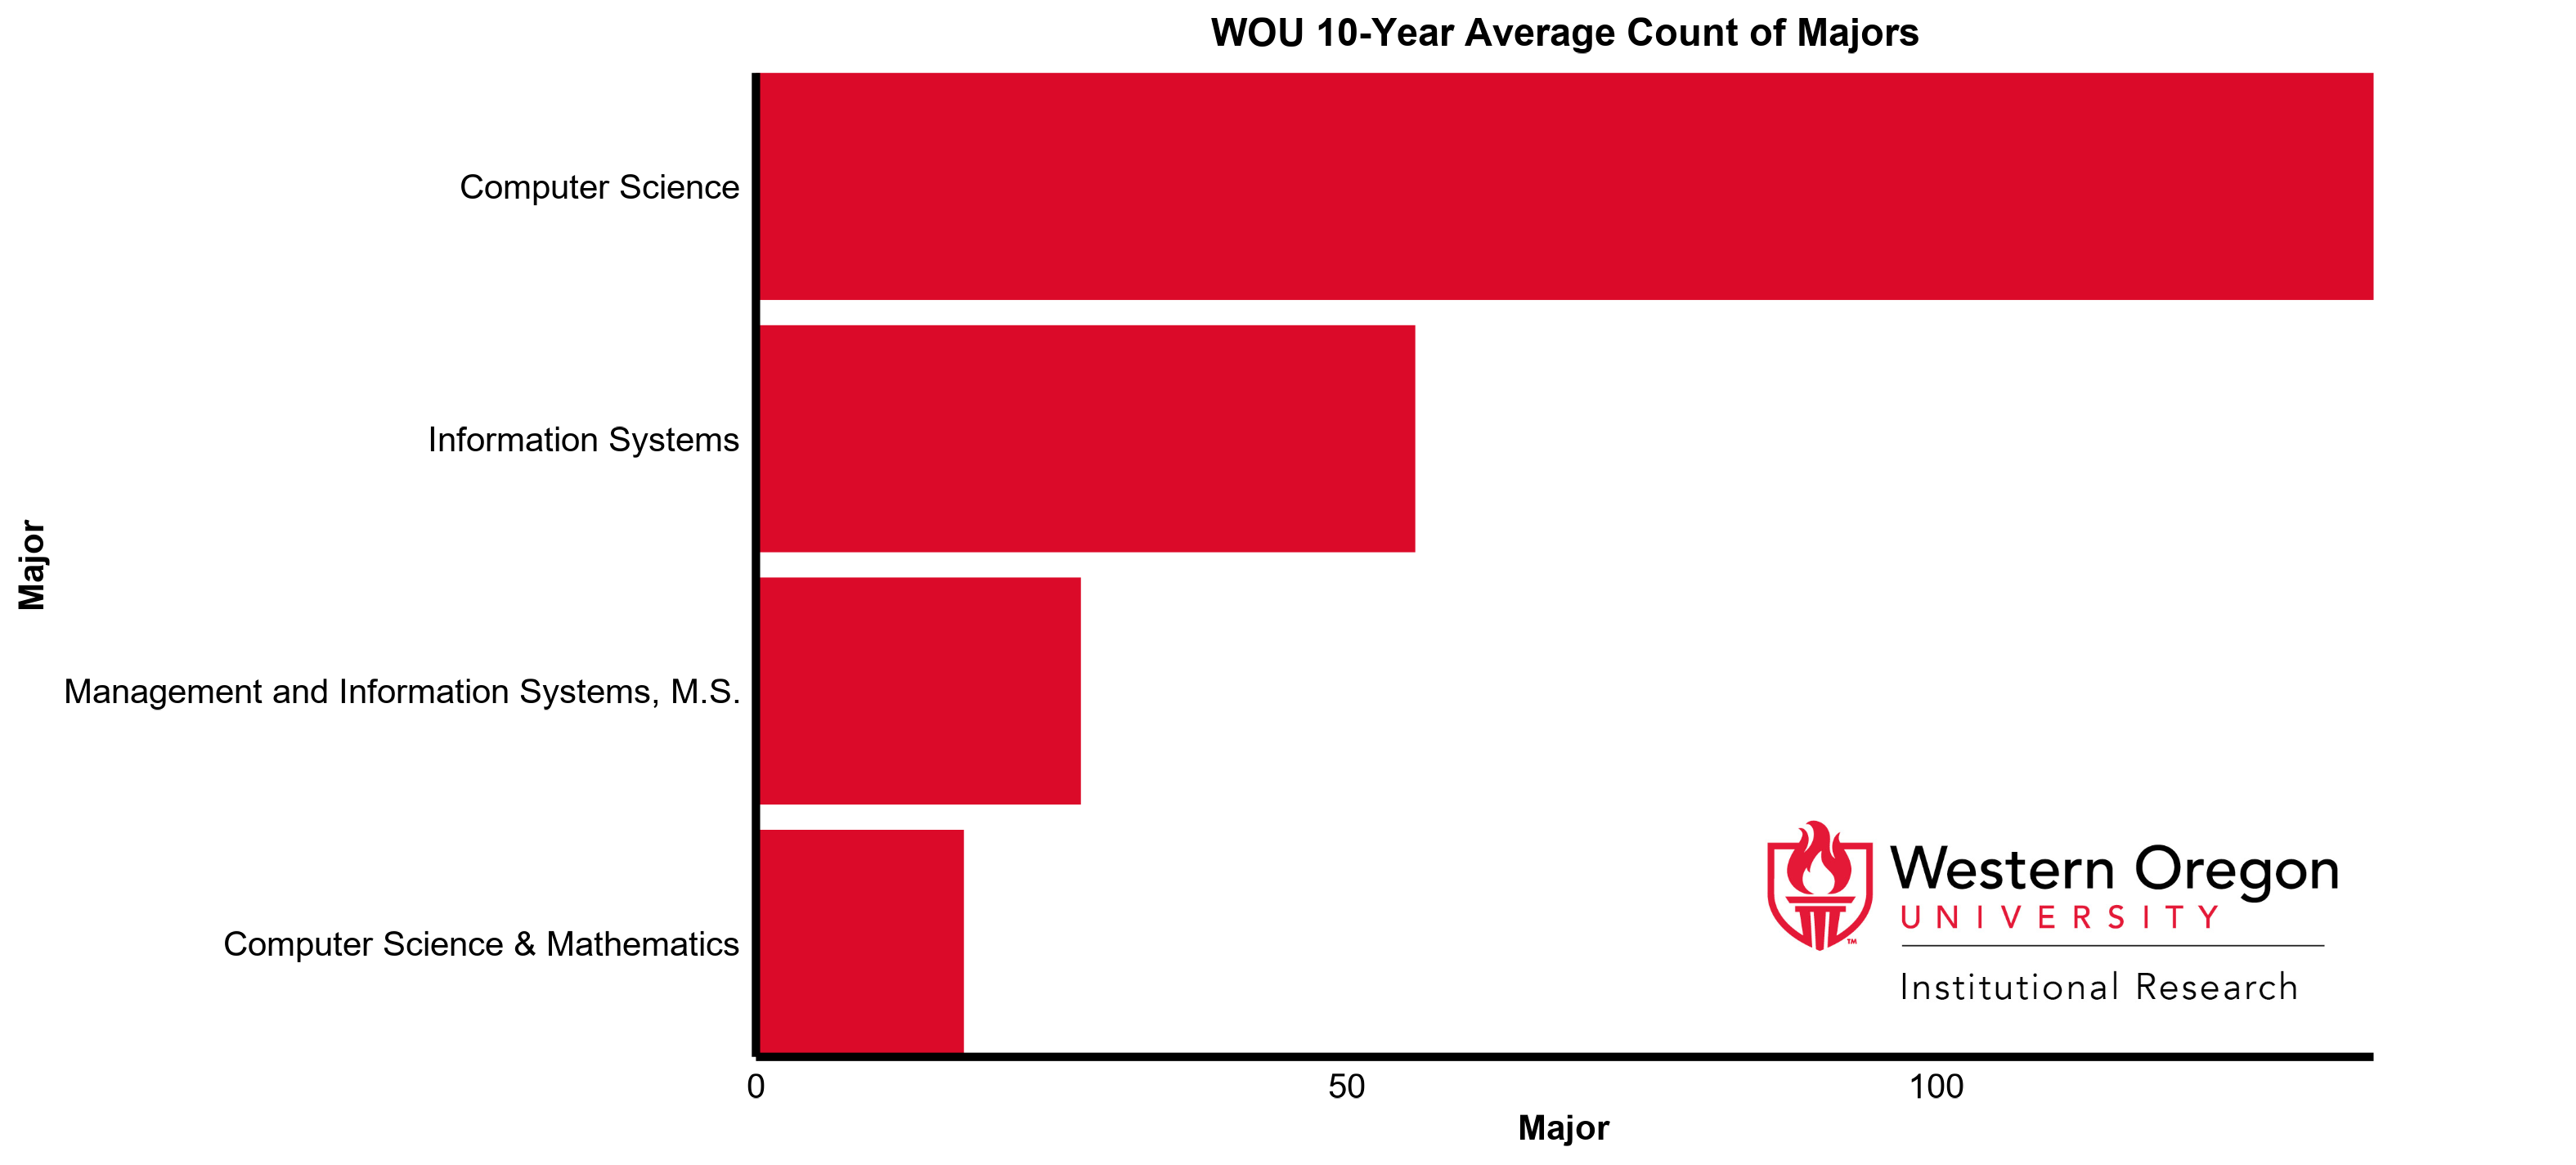 Bar graph of the 10-year average count of majors at WOU for the Computer Science division